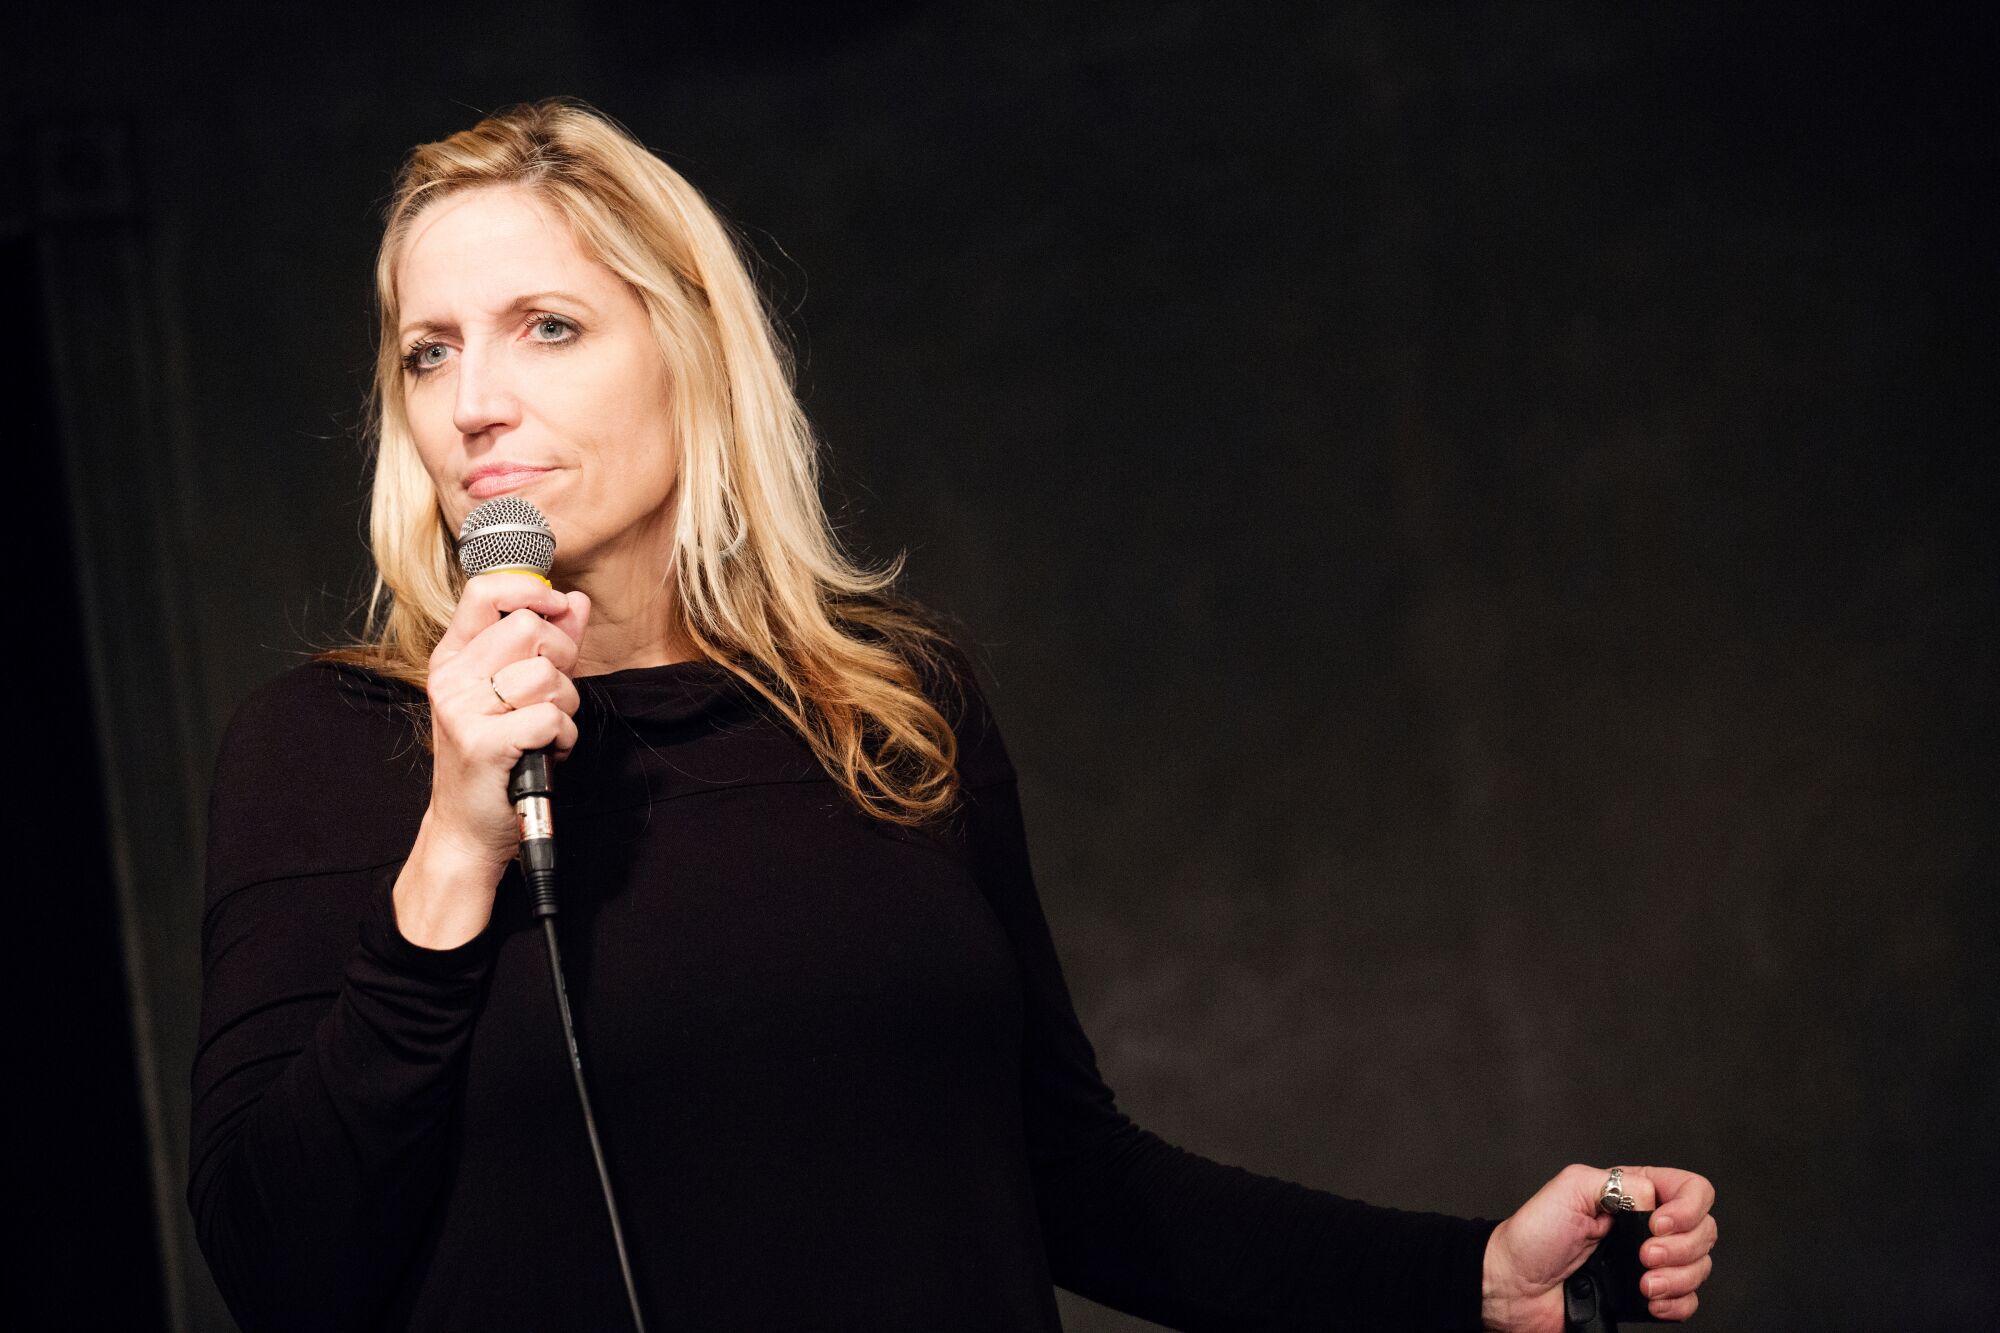 Comedian Laurie Kilmartin stands on stage with a microphone